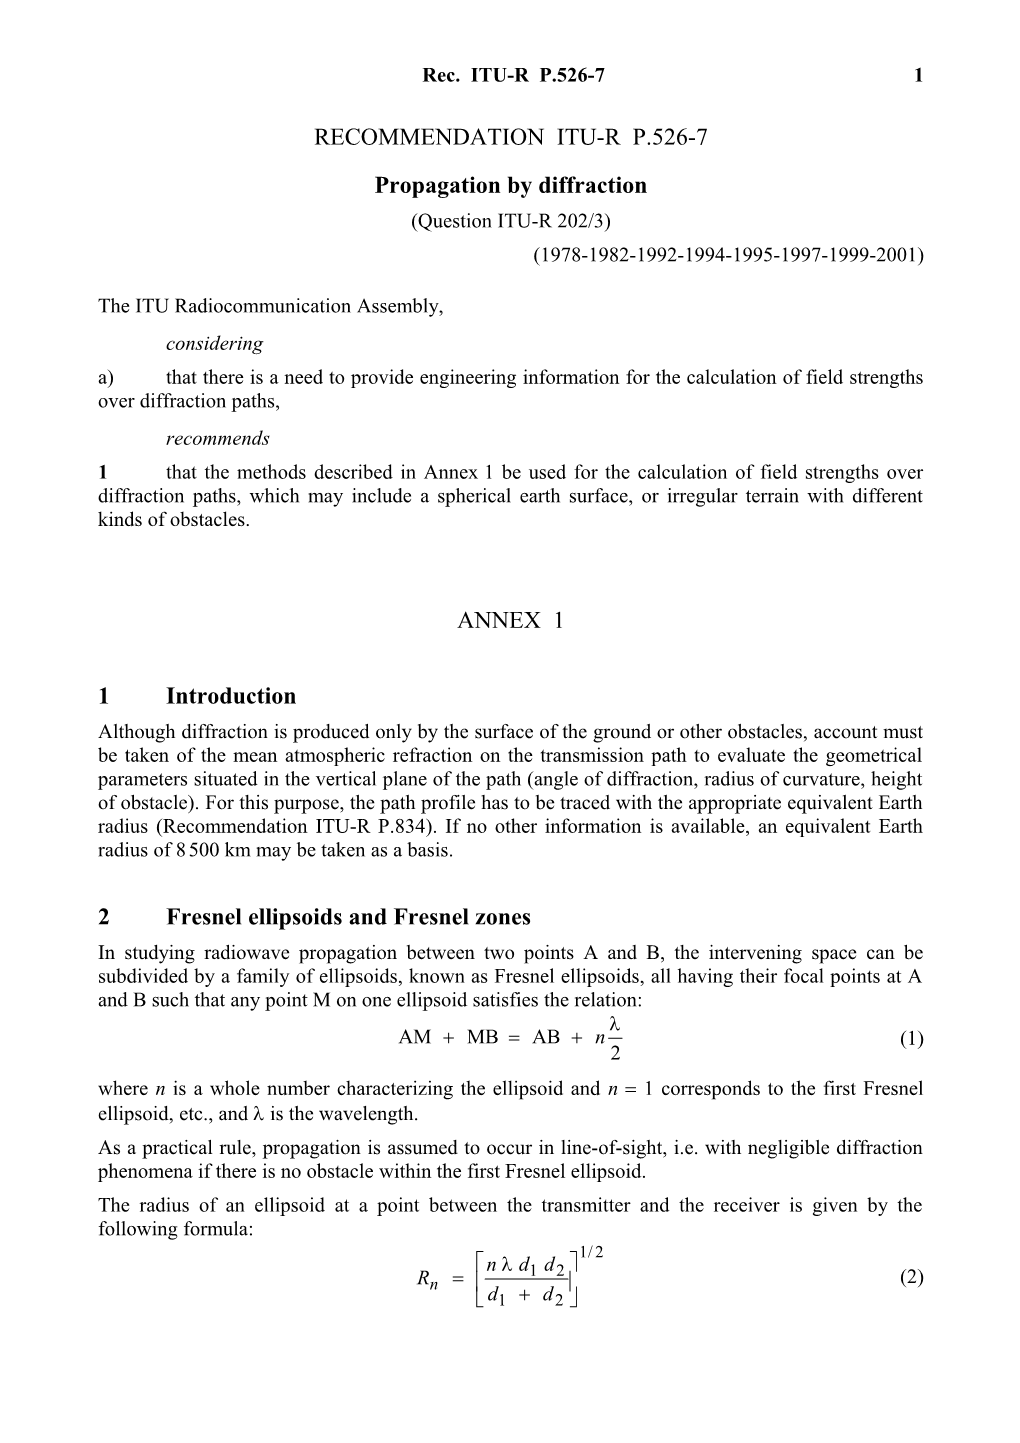 RECOMMENDATION ITU-R P.526-7 - Propagation by Diffraction